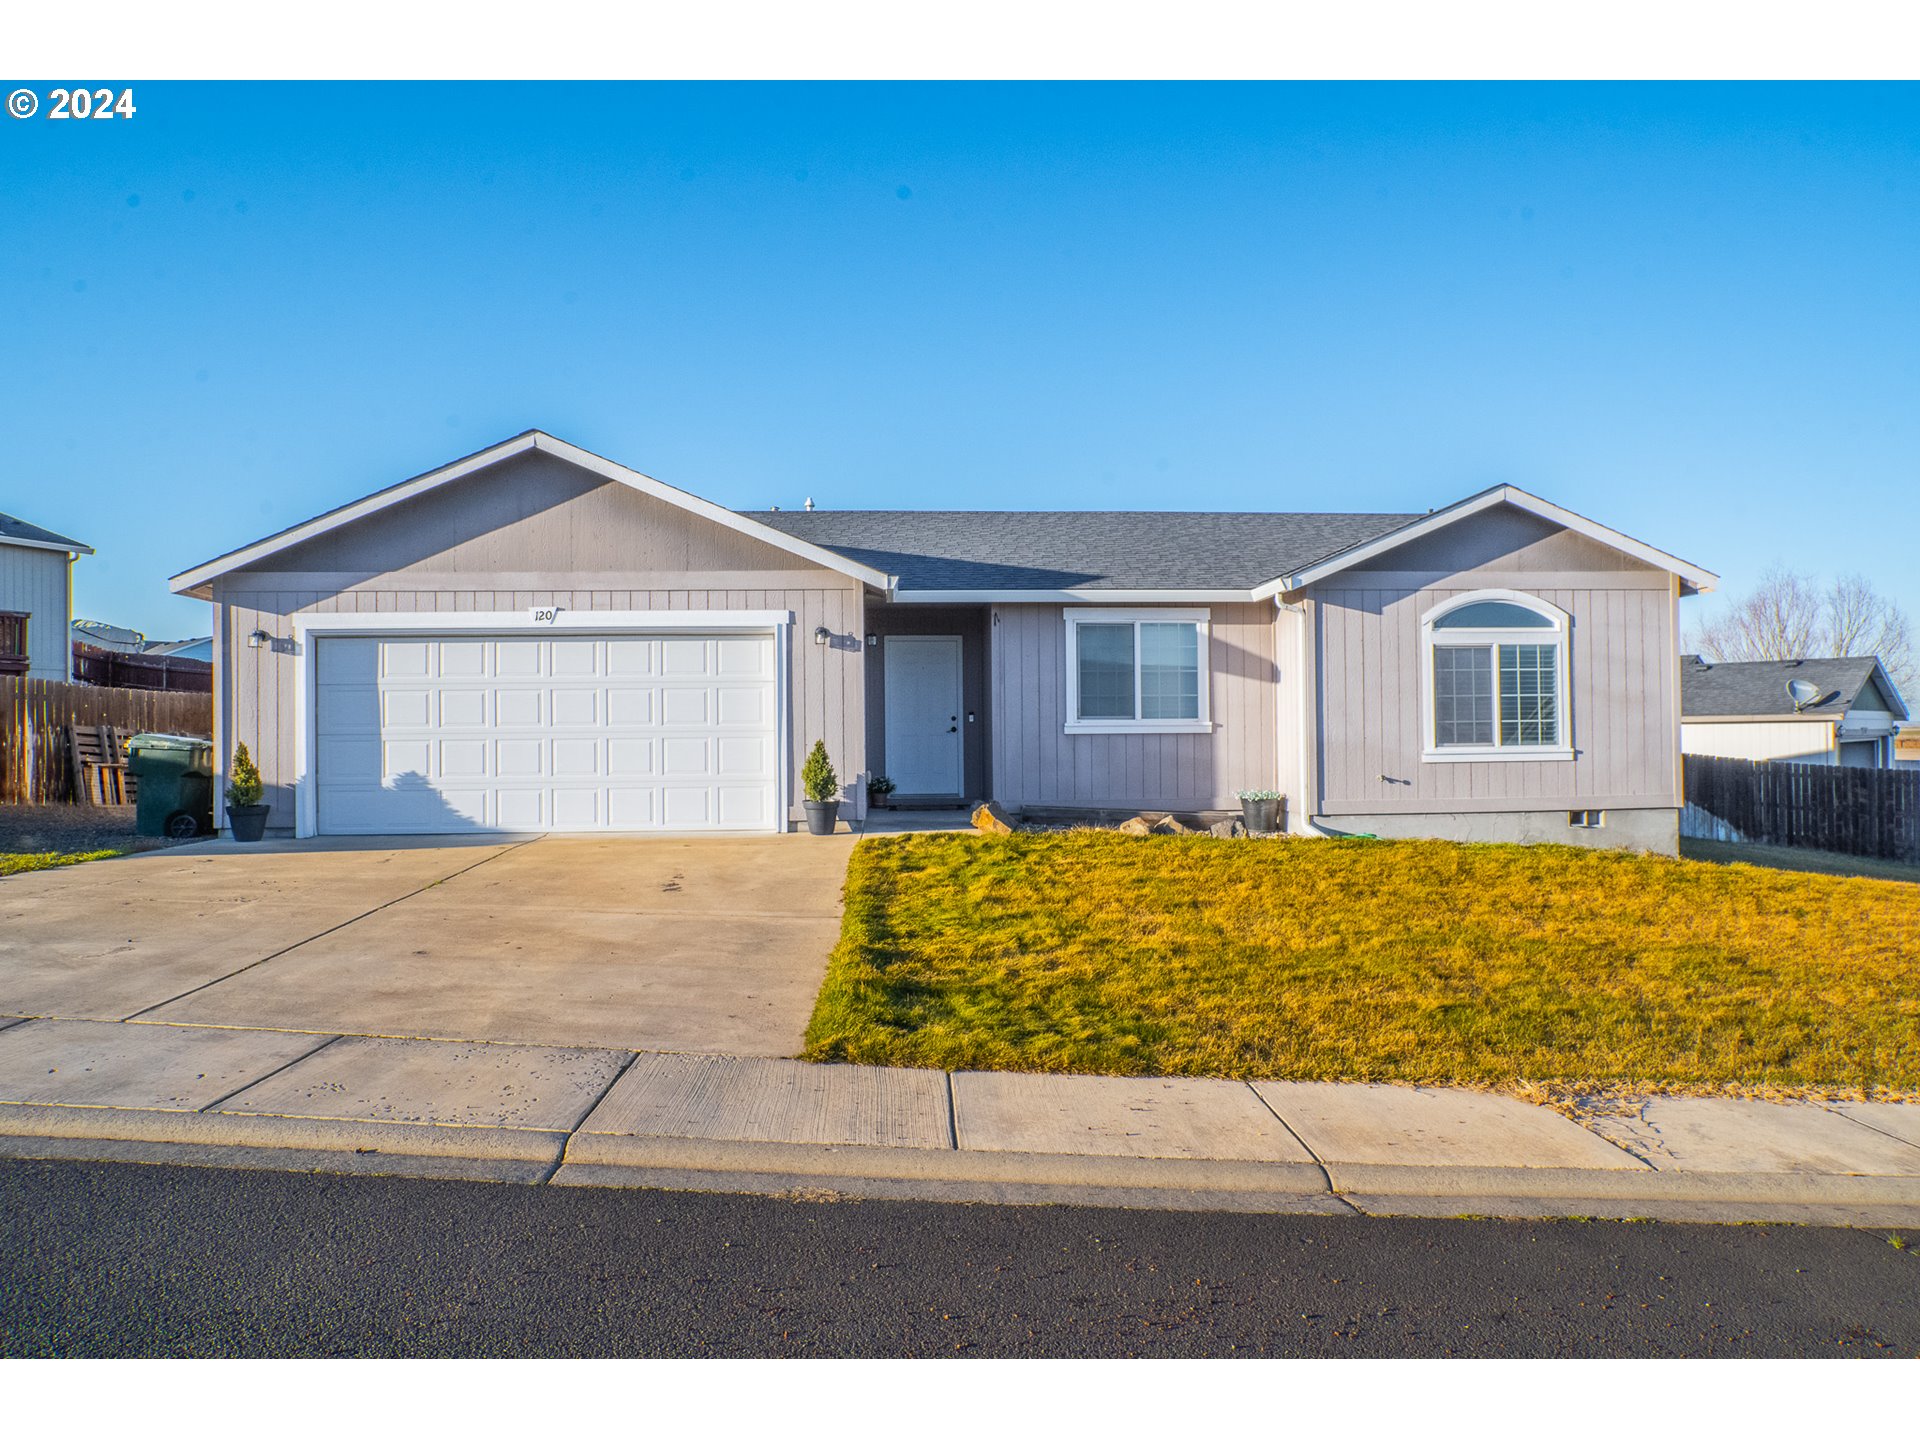 120 TEAL CT, Stanfield, OR 